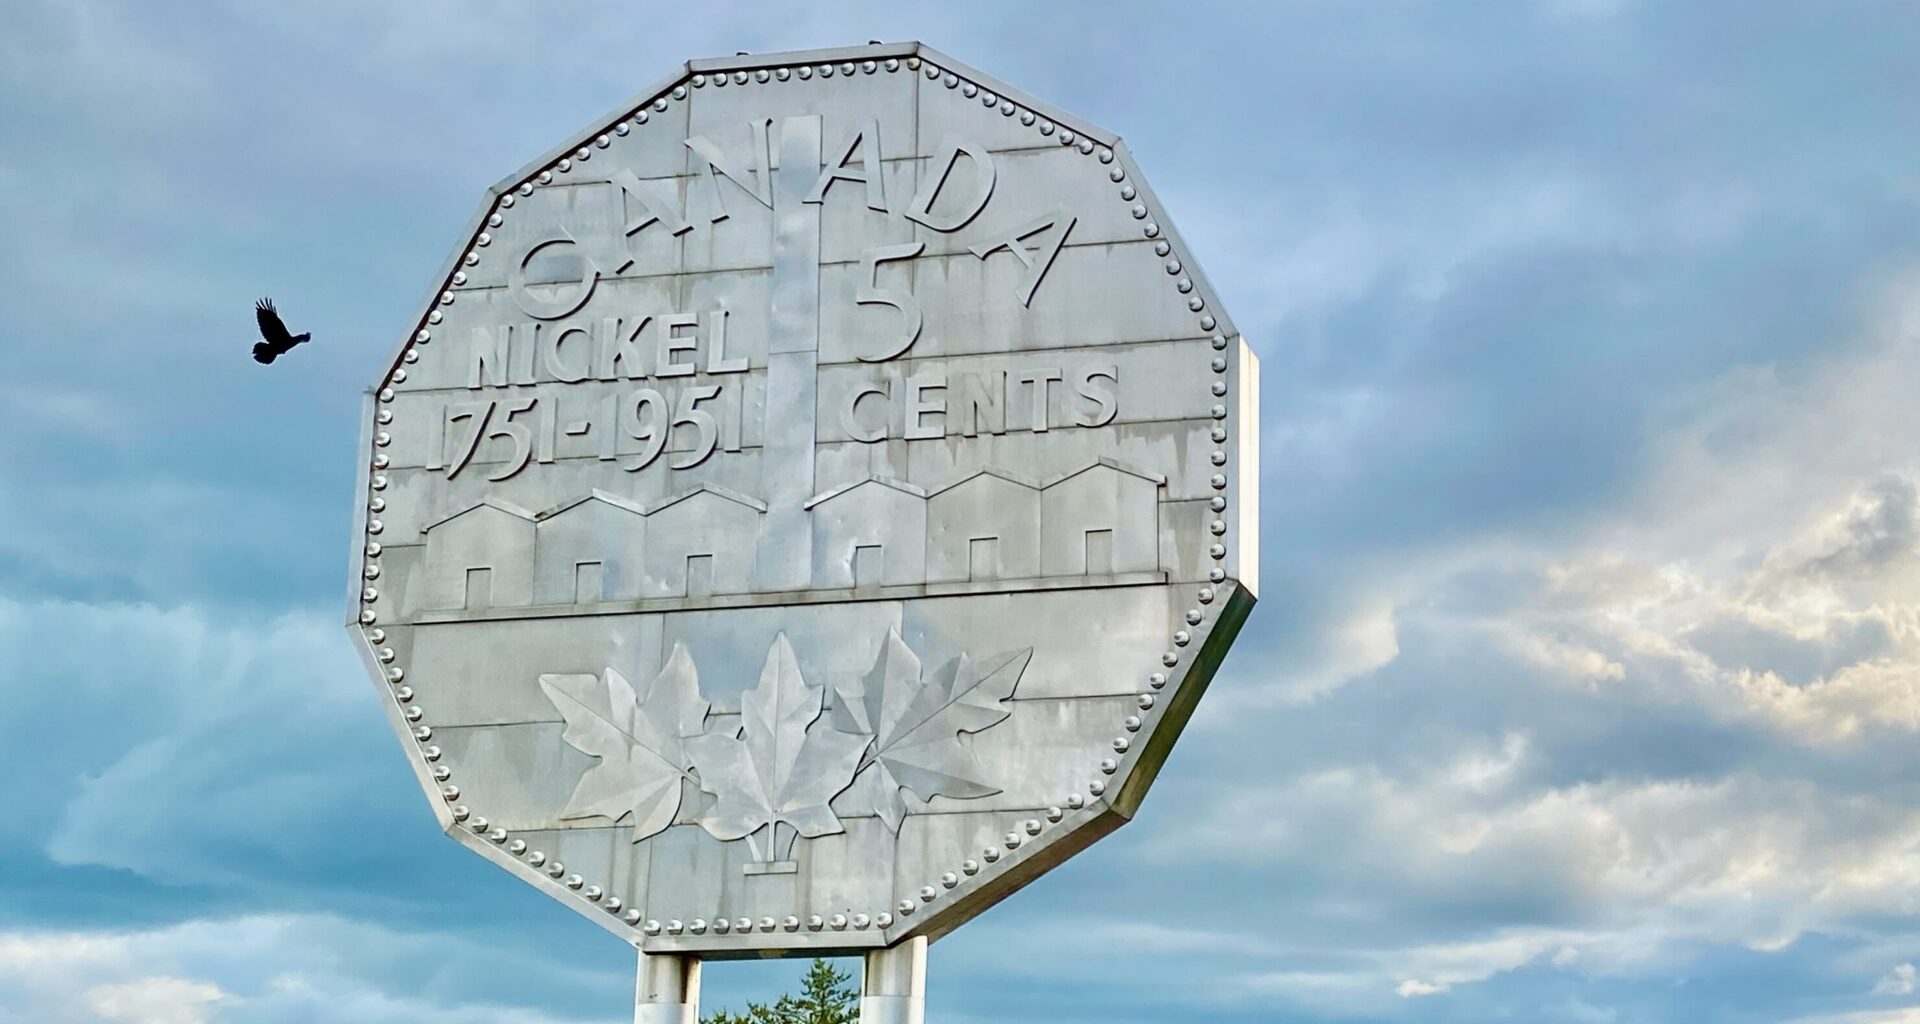 A visit to the Big Nickel stuff to do in Sudbury